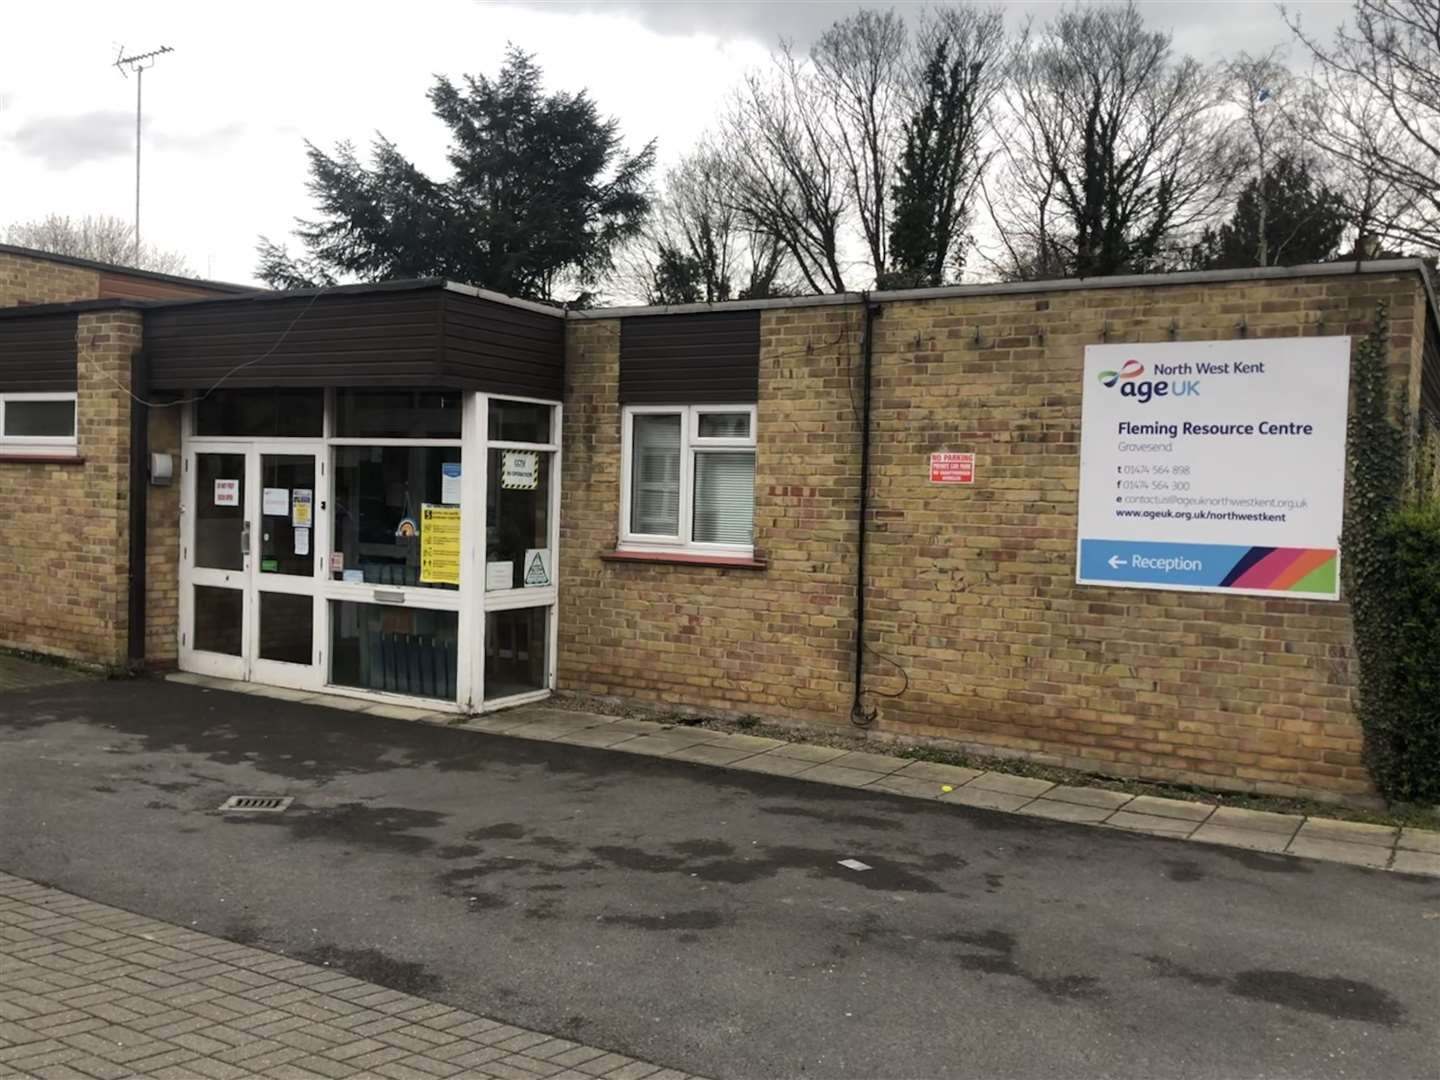 The Age UK service at the Fleming Resource Centre in Clarence Row is closing at the end of April